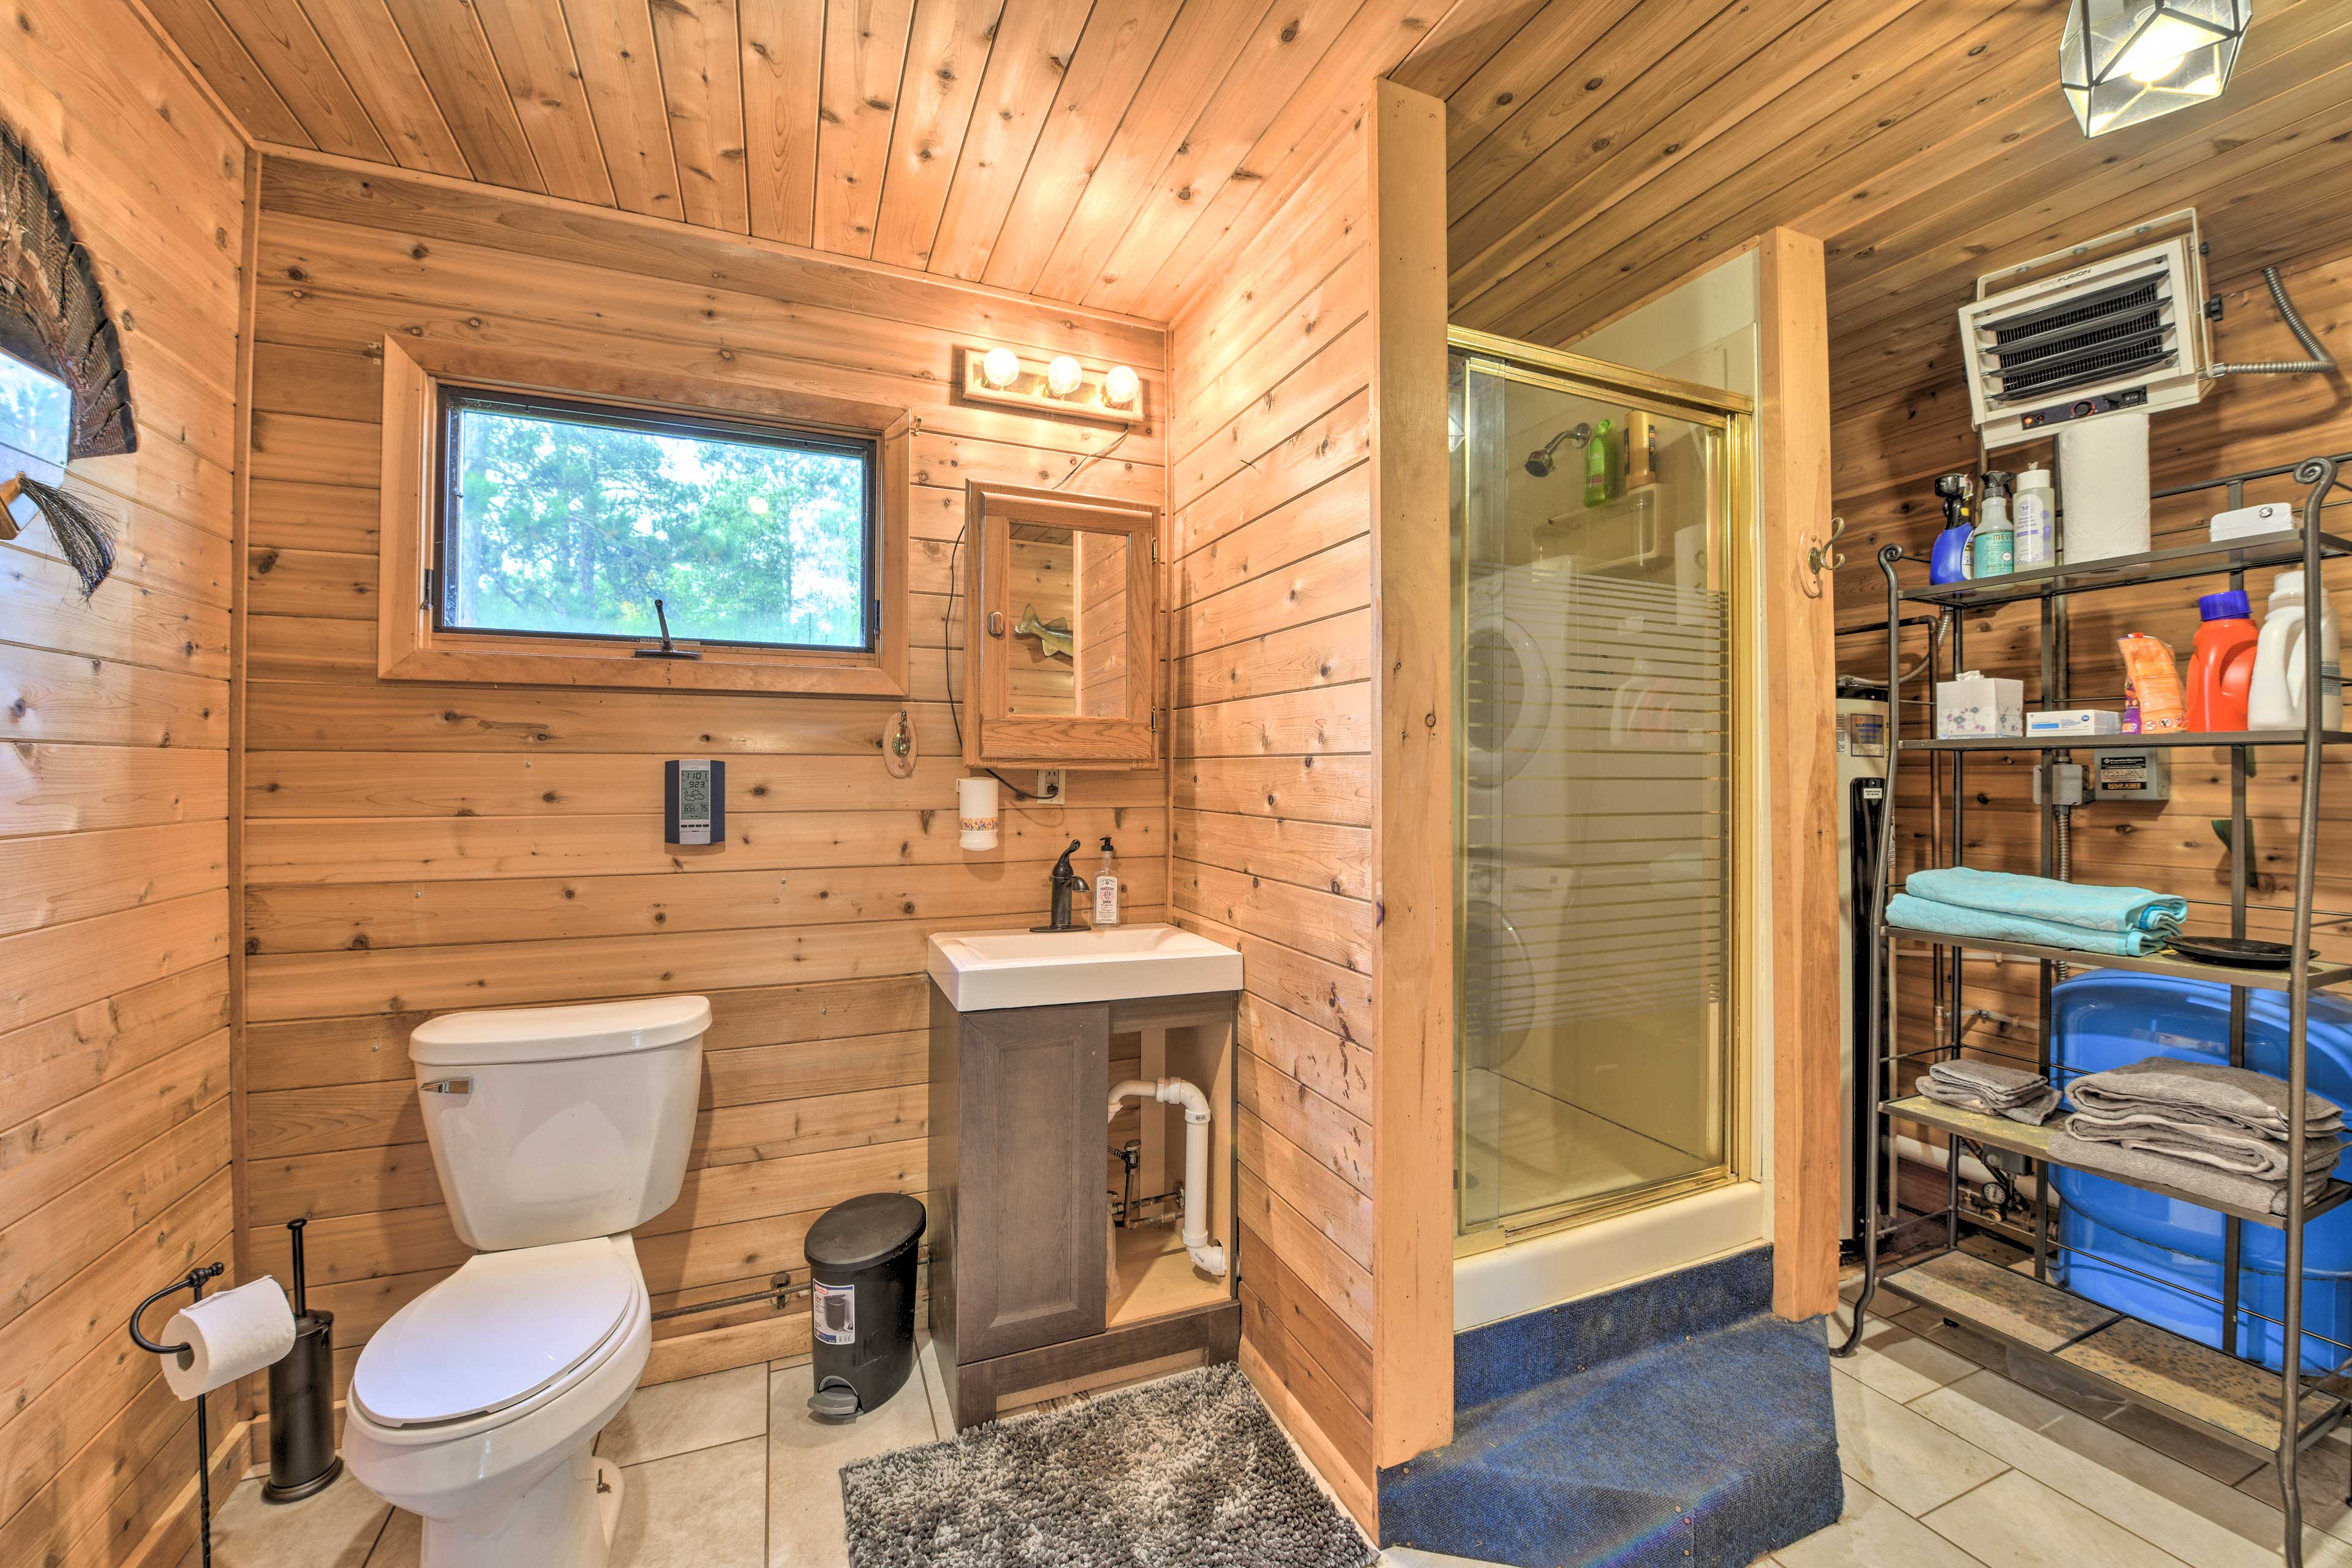 The bathroom in the bunkhouse boasts a Tongue & Groove interior.